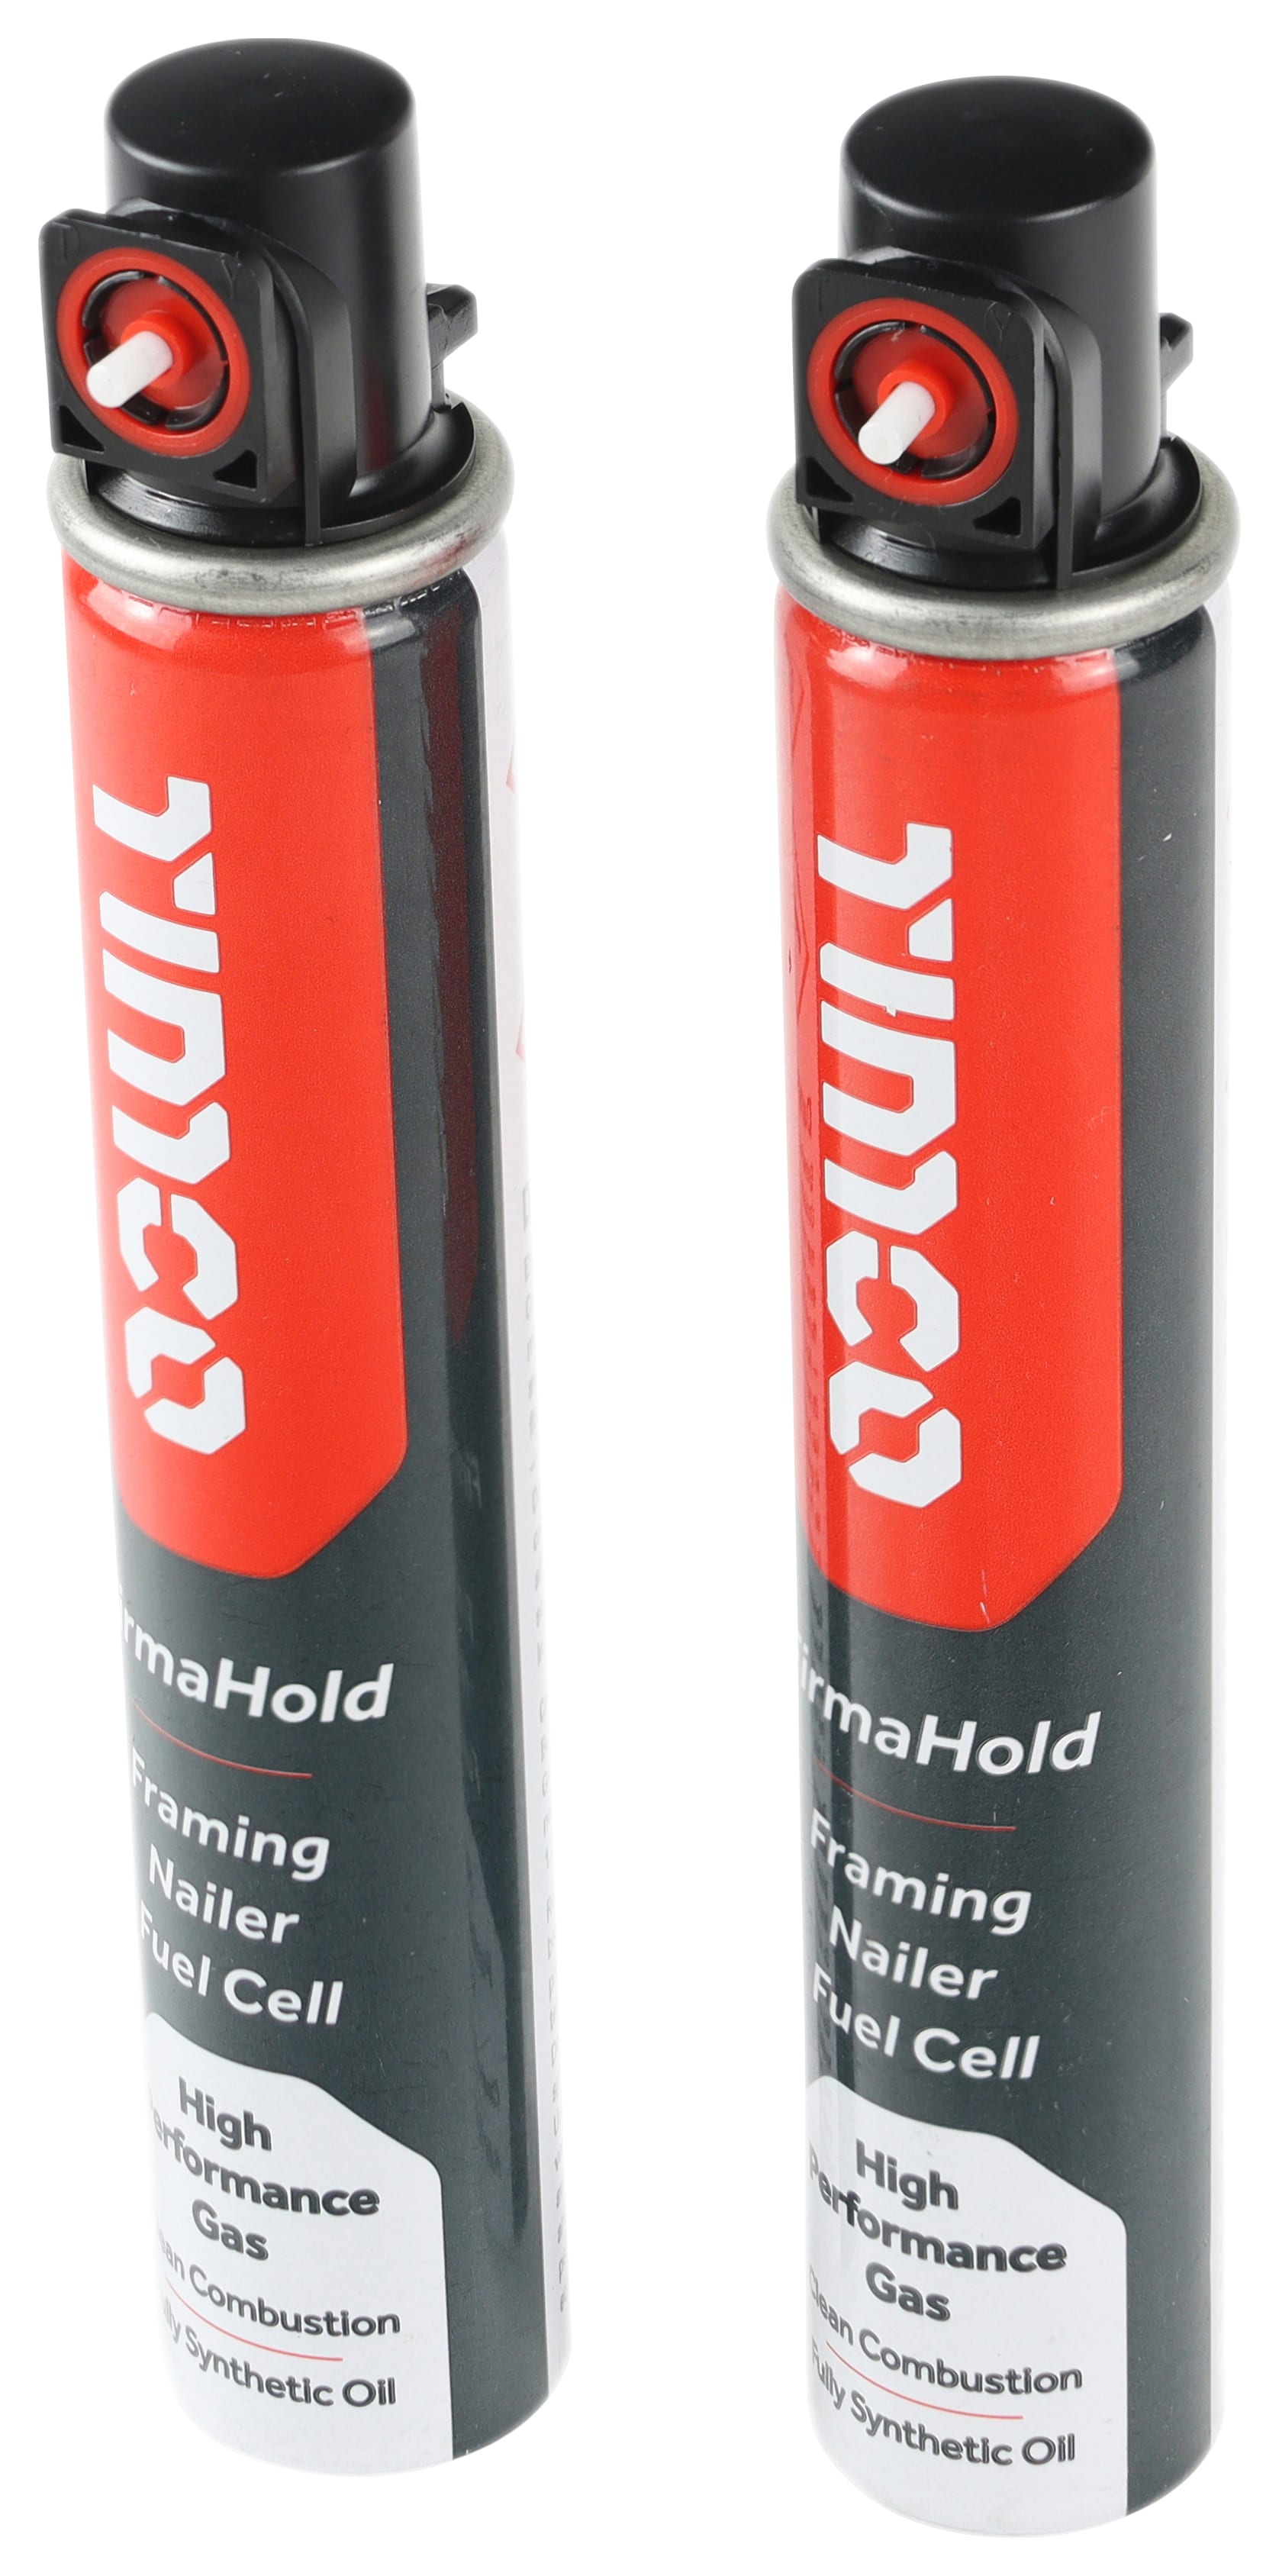 FirmaHold Framing Nailer Fuel Cells - 80ml